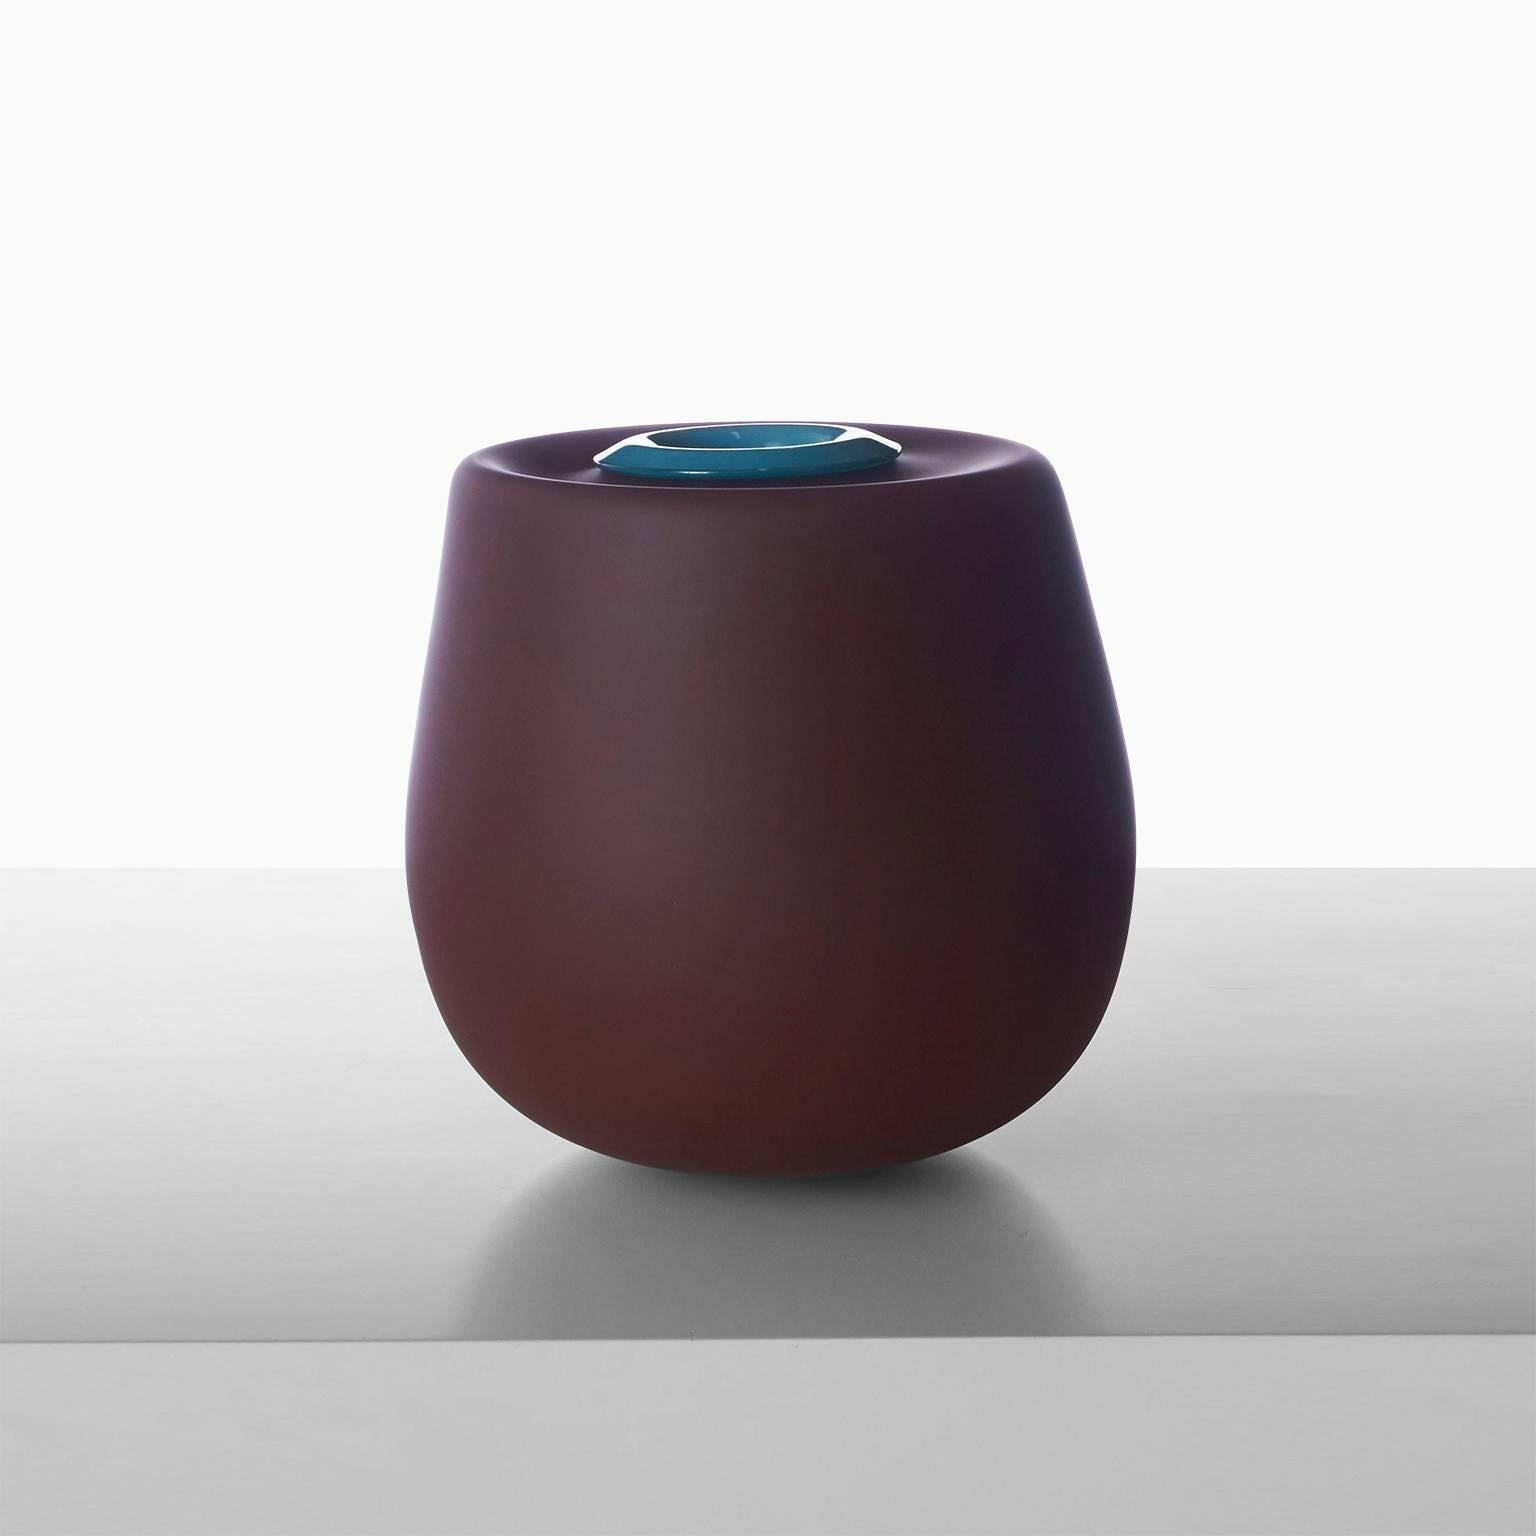 A large sculptural free hand blown glass vase entitled Void Incalmo in raw umber with a removable turquoise insert. Created by celebrated Parisian glass artist Jeremy Maxwell Wintrebert.